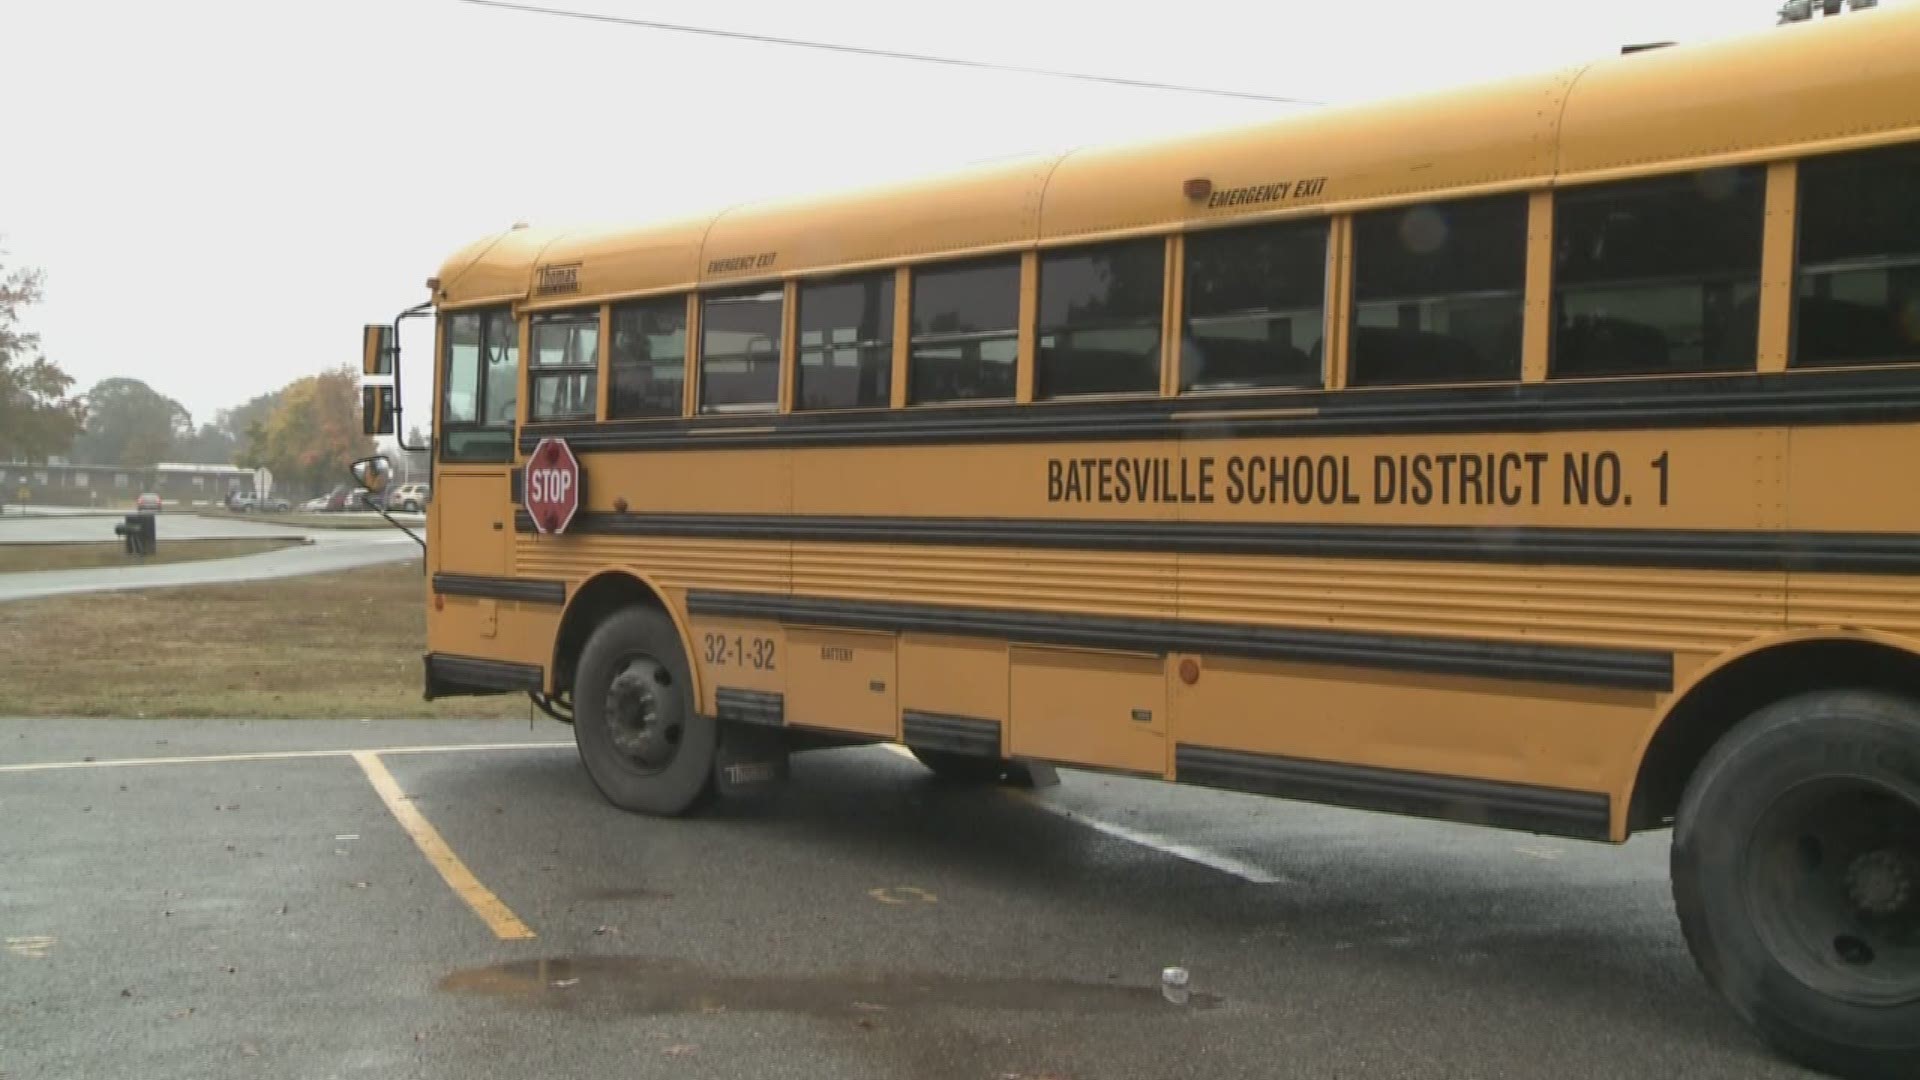 All schools in Batesville will be closed tomorrow, including the preschool, due to the increasing number of students who are out sick.